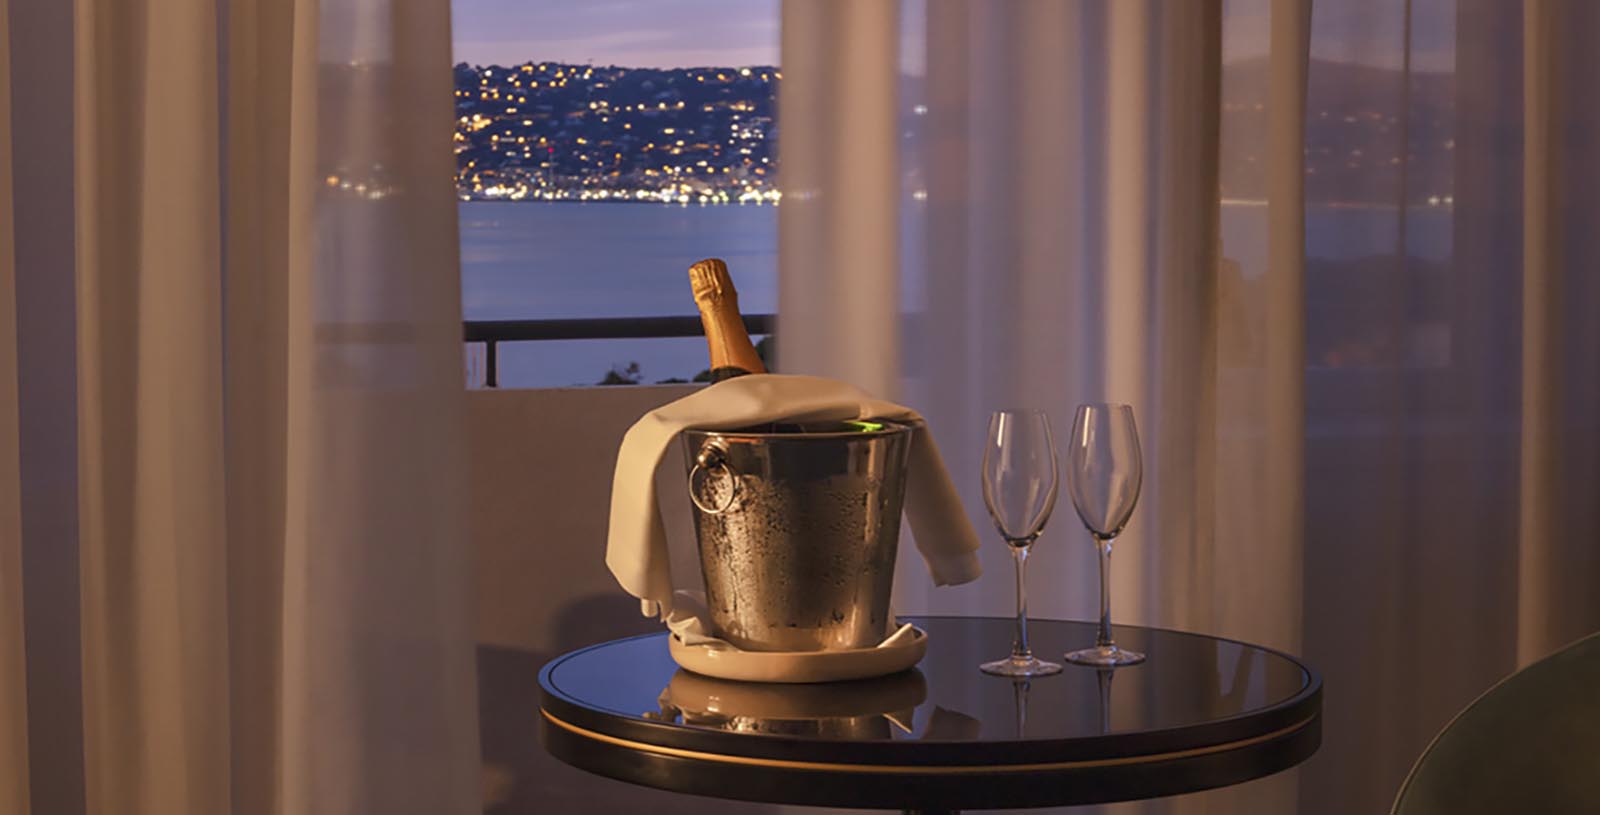 Taste a flute of champagne while enjoying the dazzling lights and shimmer of a Mediterranean evening.